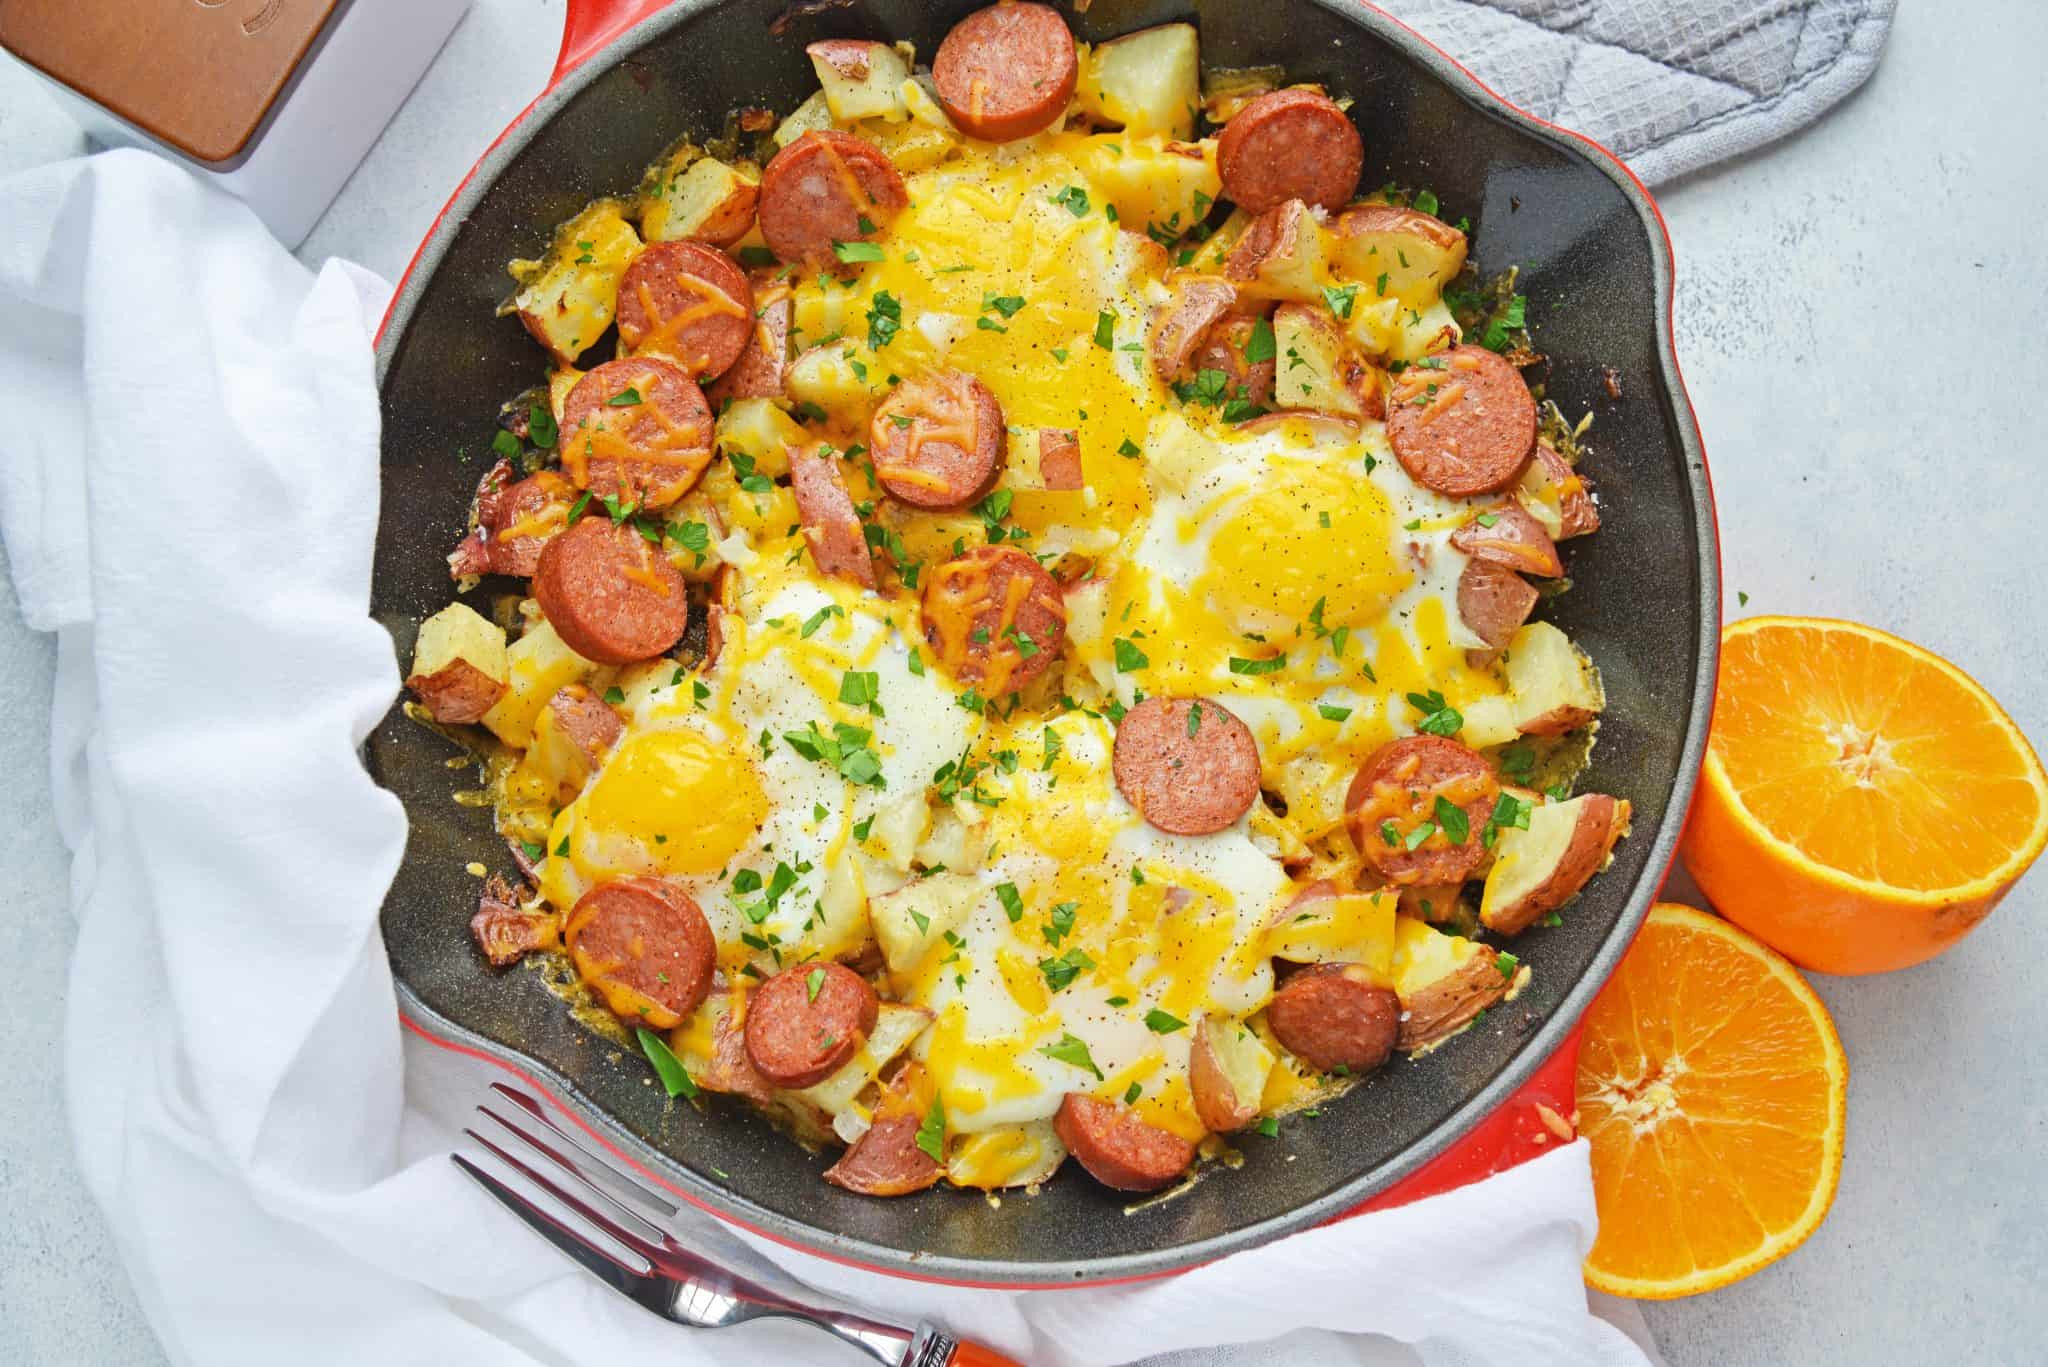 Breakfast Recipes with Sausage and Eggs Fresh Sausage and Egg Skillet A Breakfast Skillet Recipe